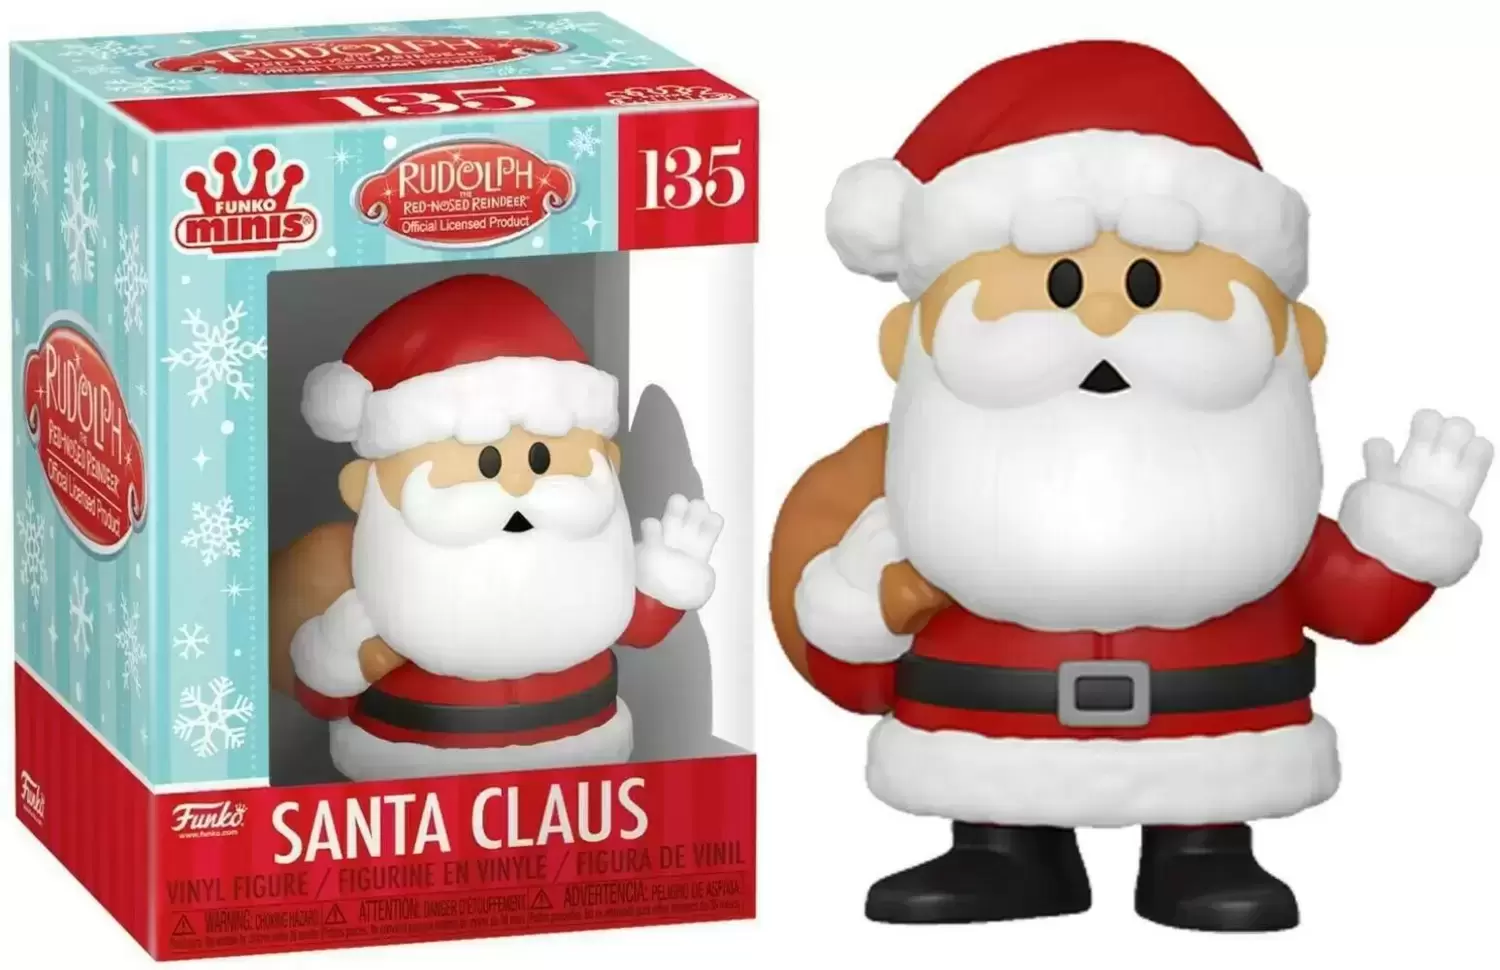 Funko Minis - Rudolph the Red-Nosed Reindeer - Santa Claus